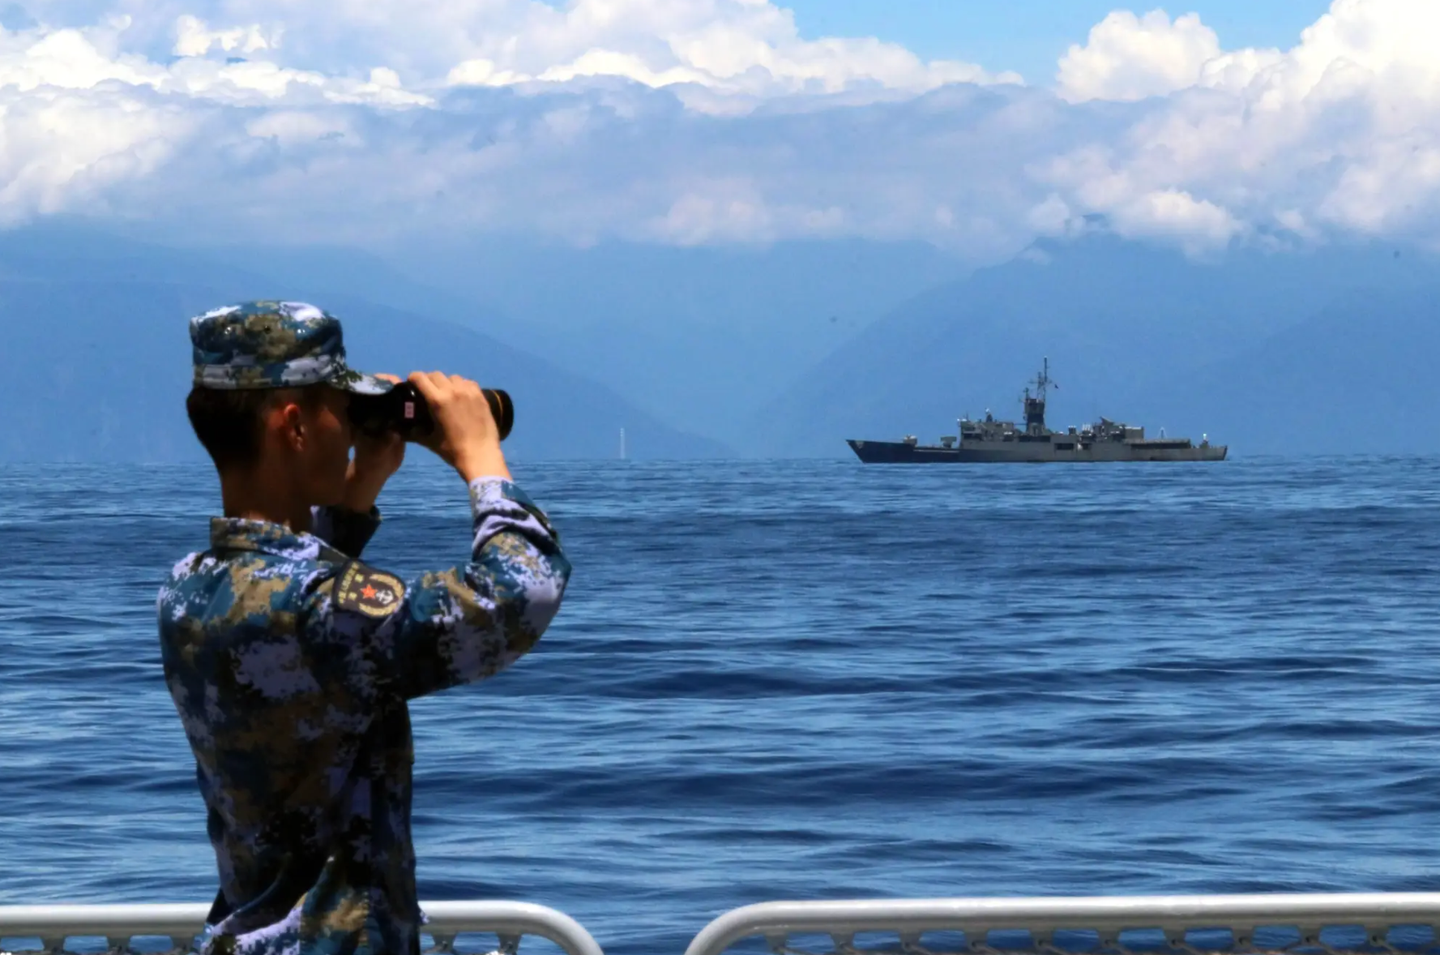 A PLA soldier looks through binoculars during combat exercises and training of the Eastern Theater Command of the Chinese People’s Liberation Army in the waters around Taiwan, August 5, 2022.&nbsp;<em>Photo by Lin Jian/Xinhua via Getty Images</em>